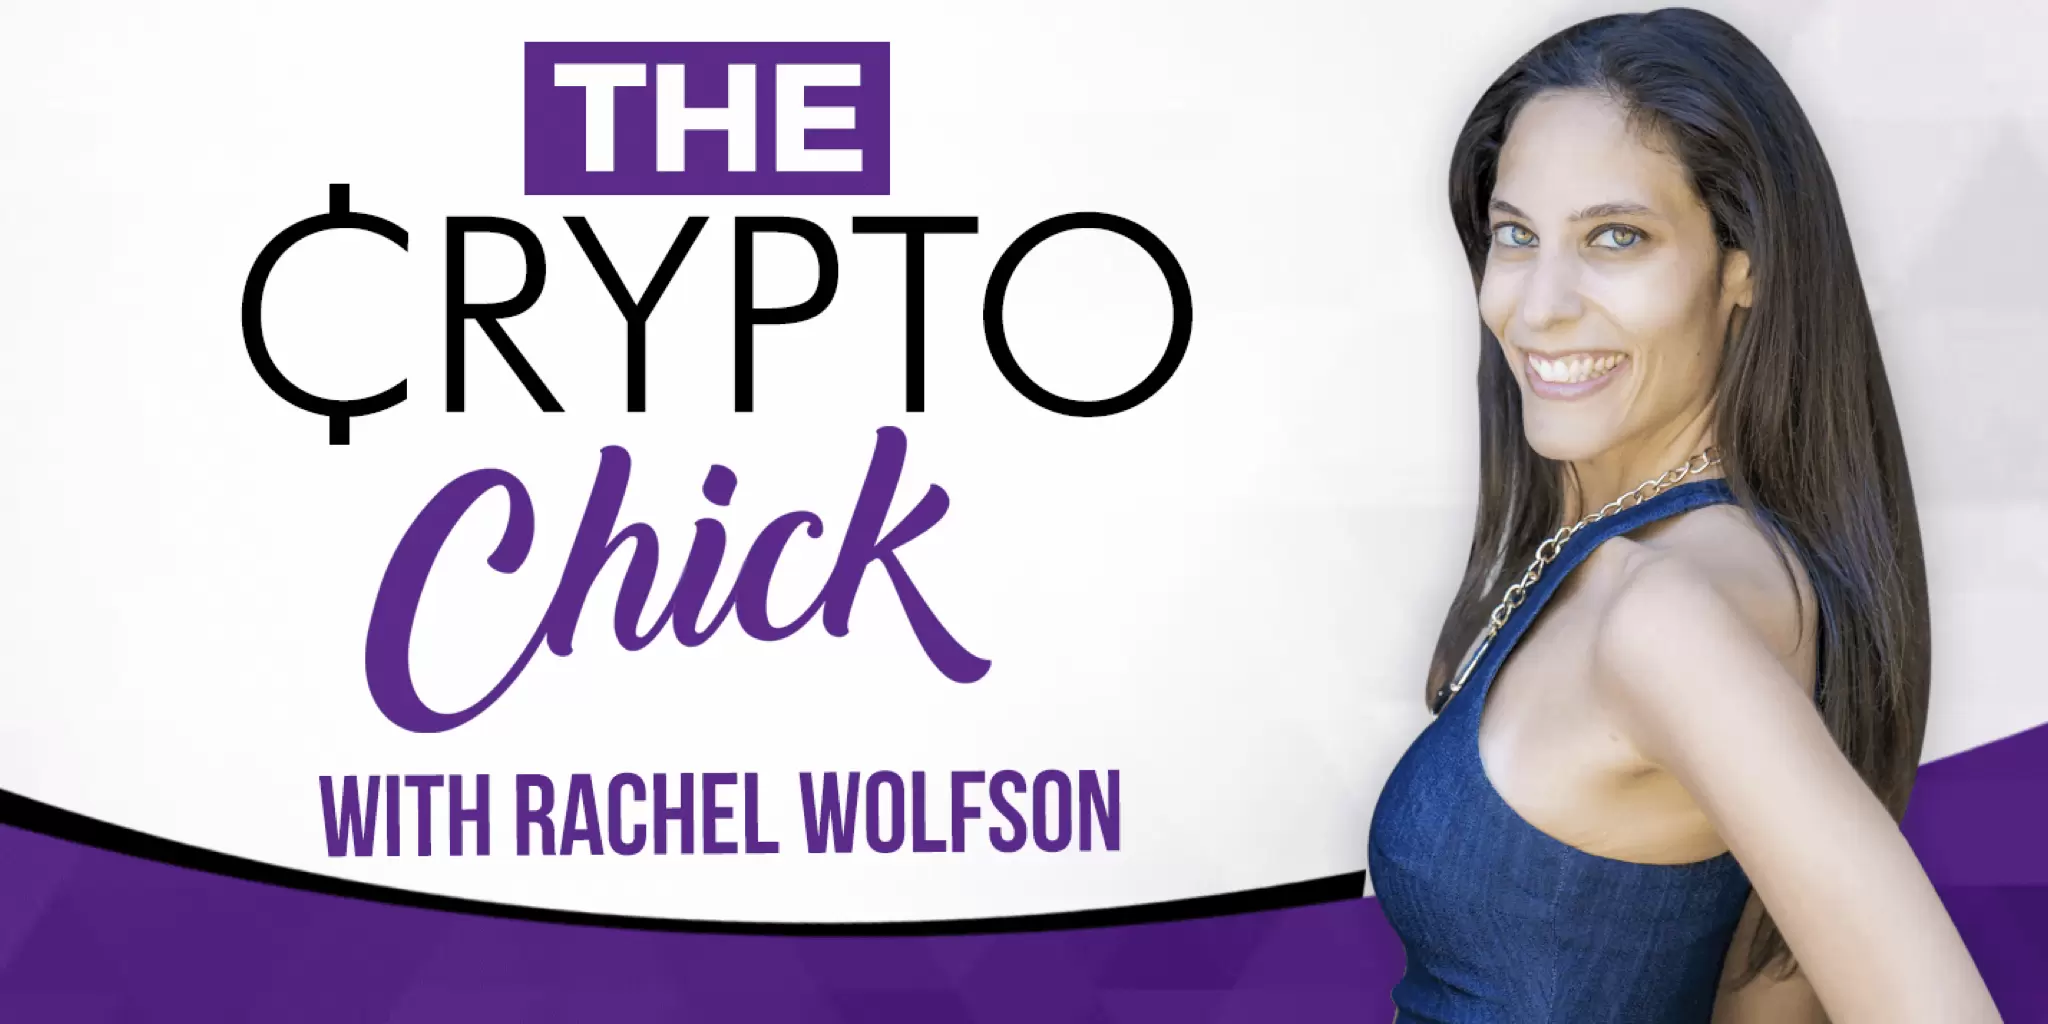 The crypto chick ethereum wallet youtube